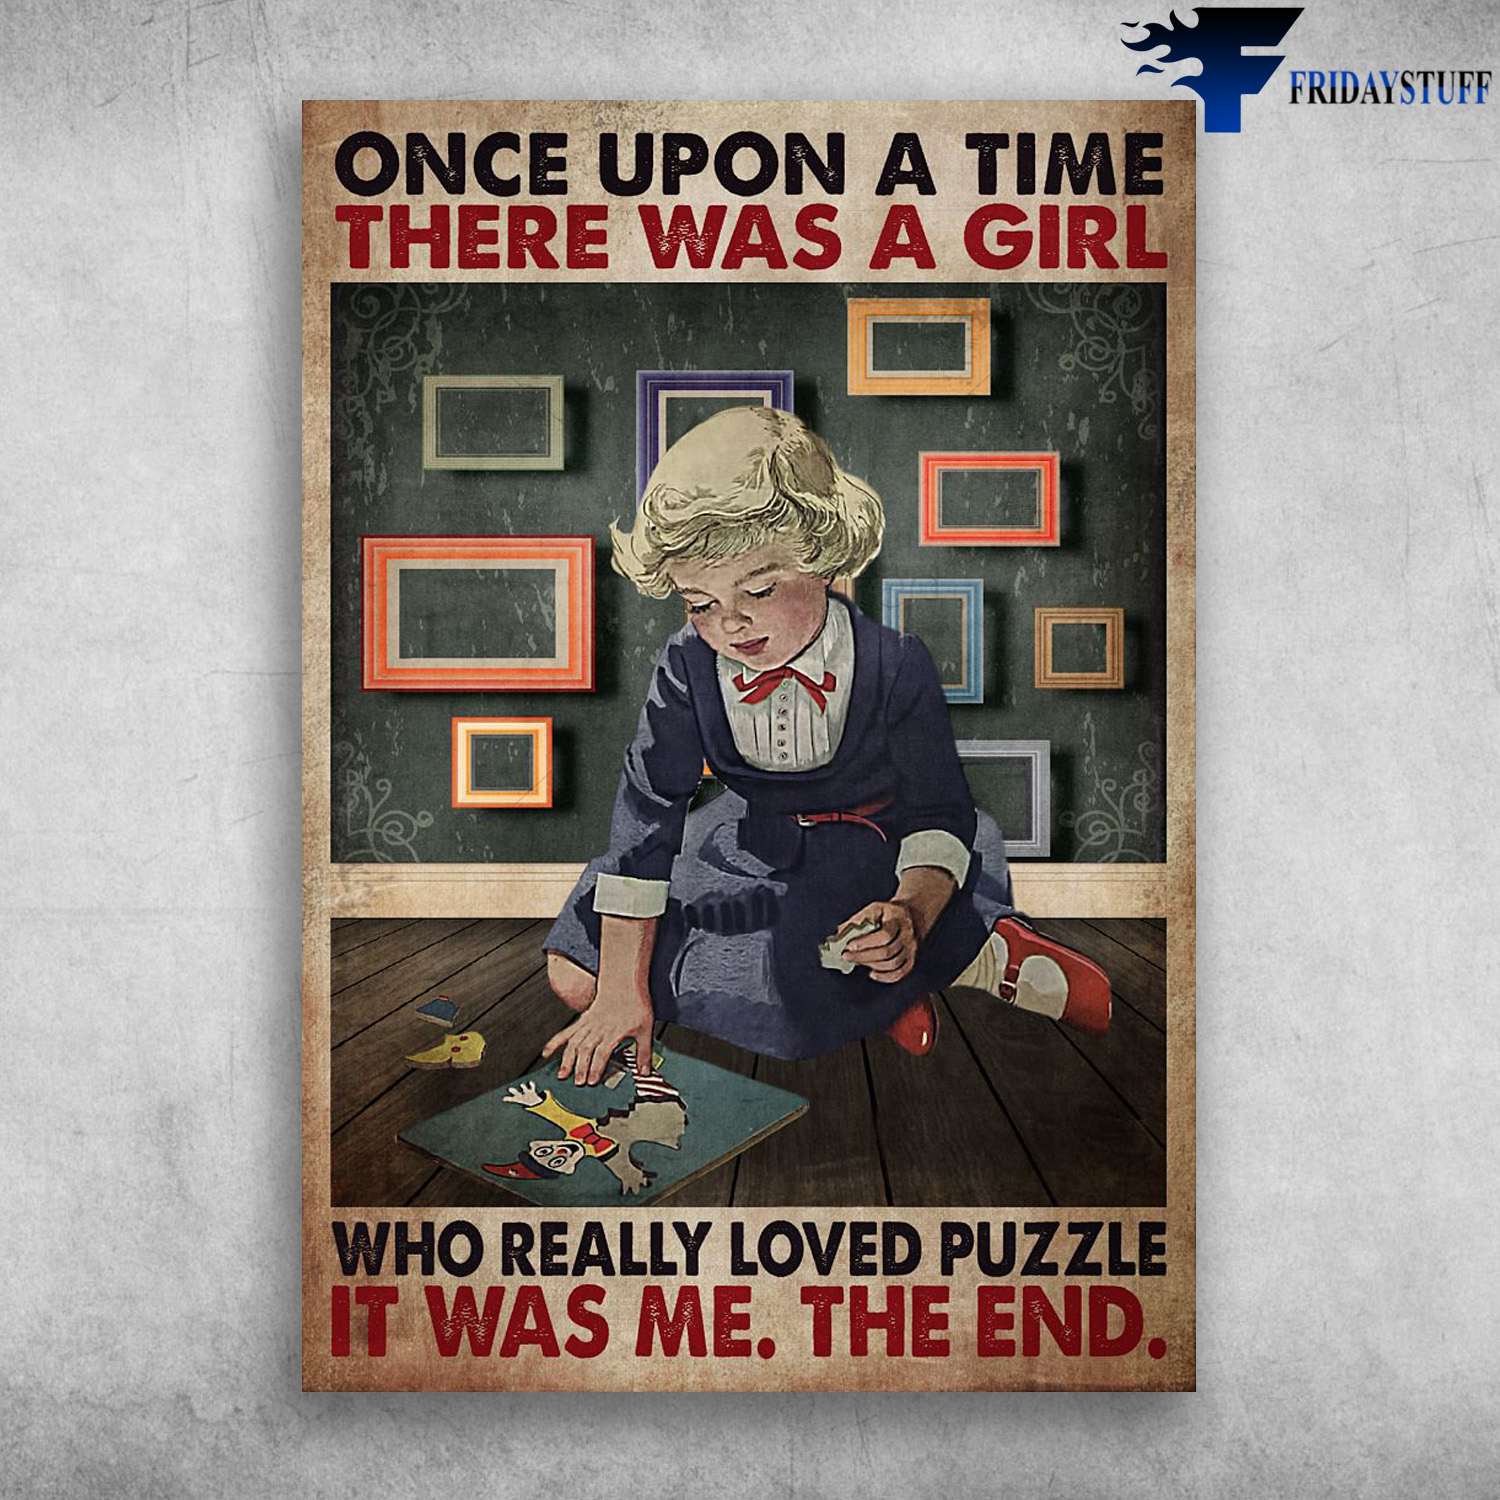 Puzzle Girl - Once Upon A Time, There Was A Girl, Who Really Loved Puzzle, It Was Me, The End, Little Girl Puzzle